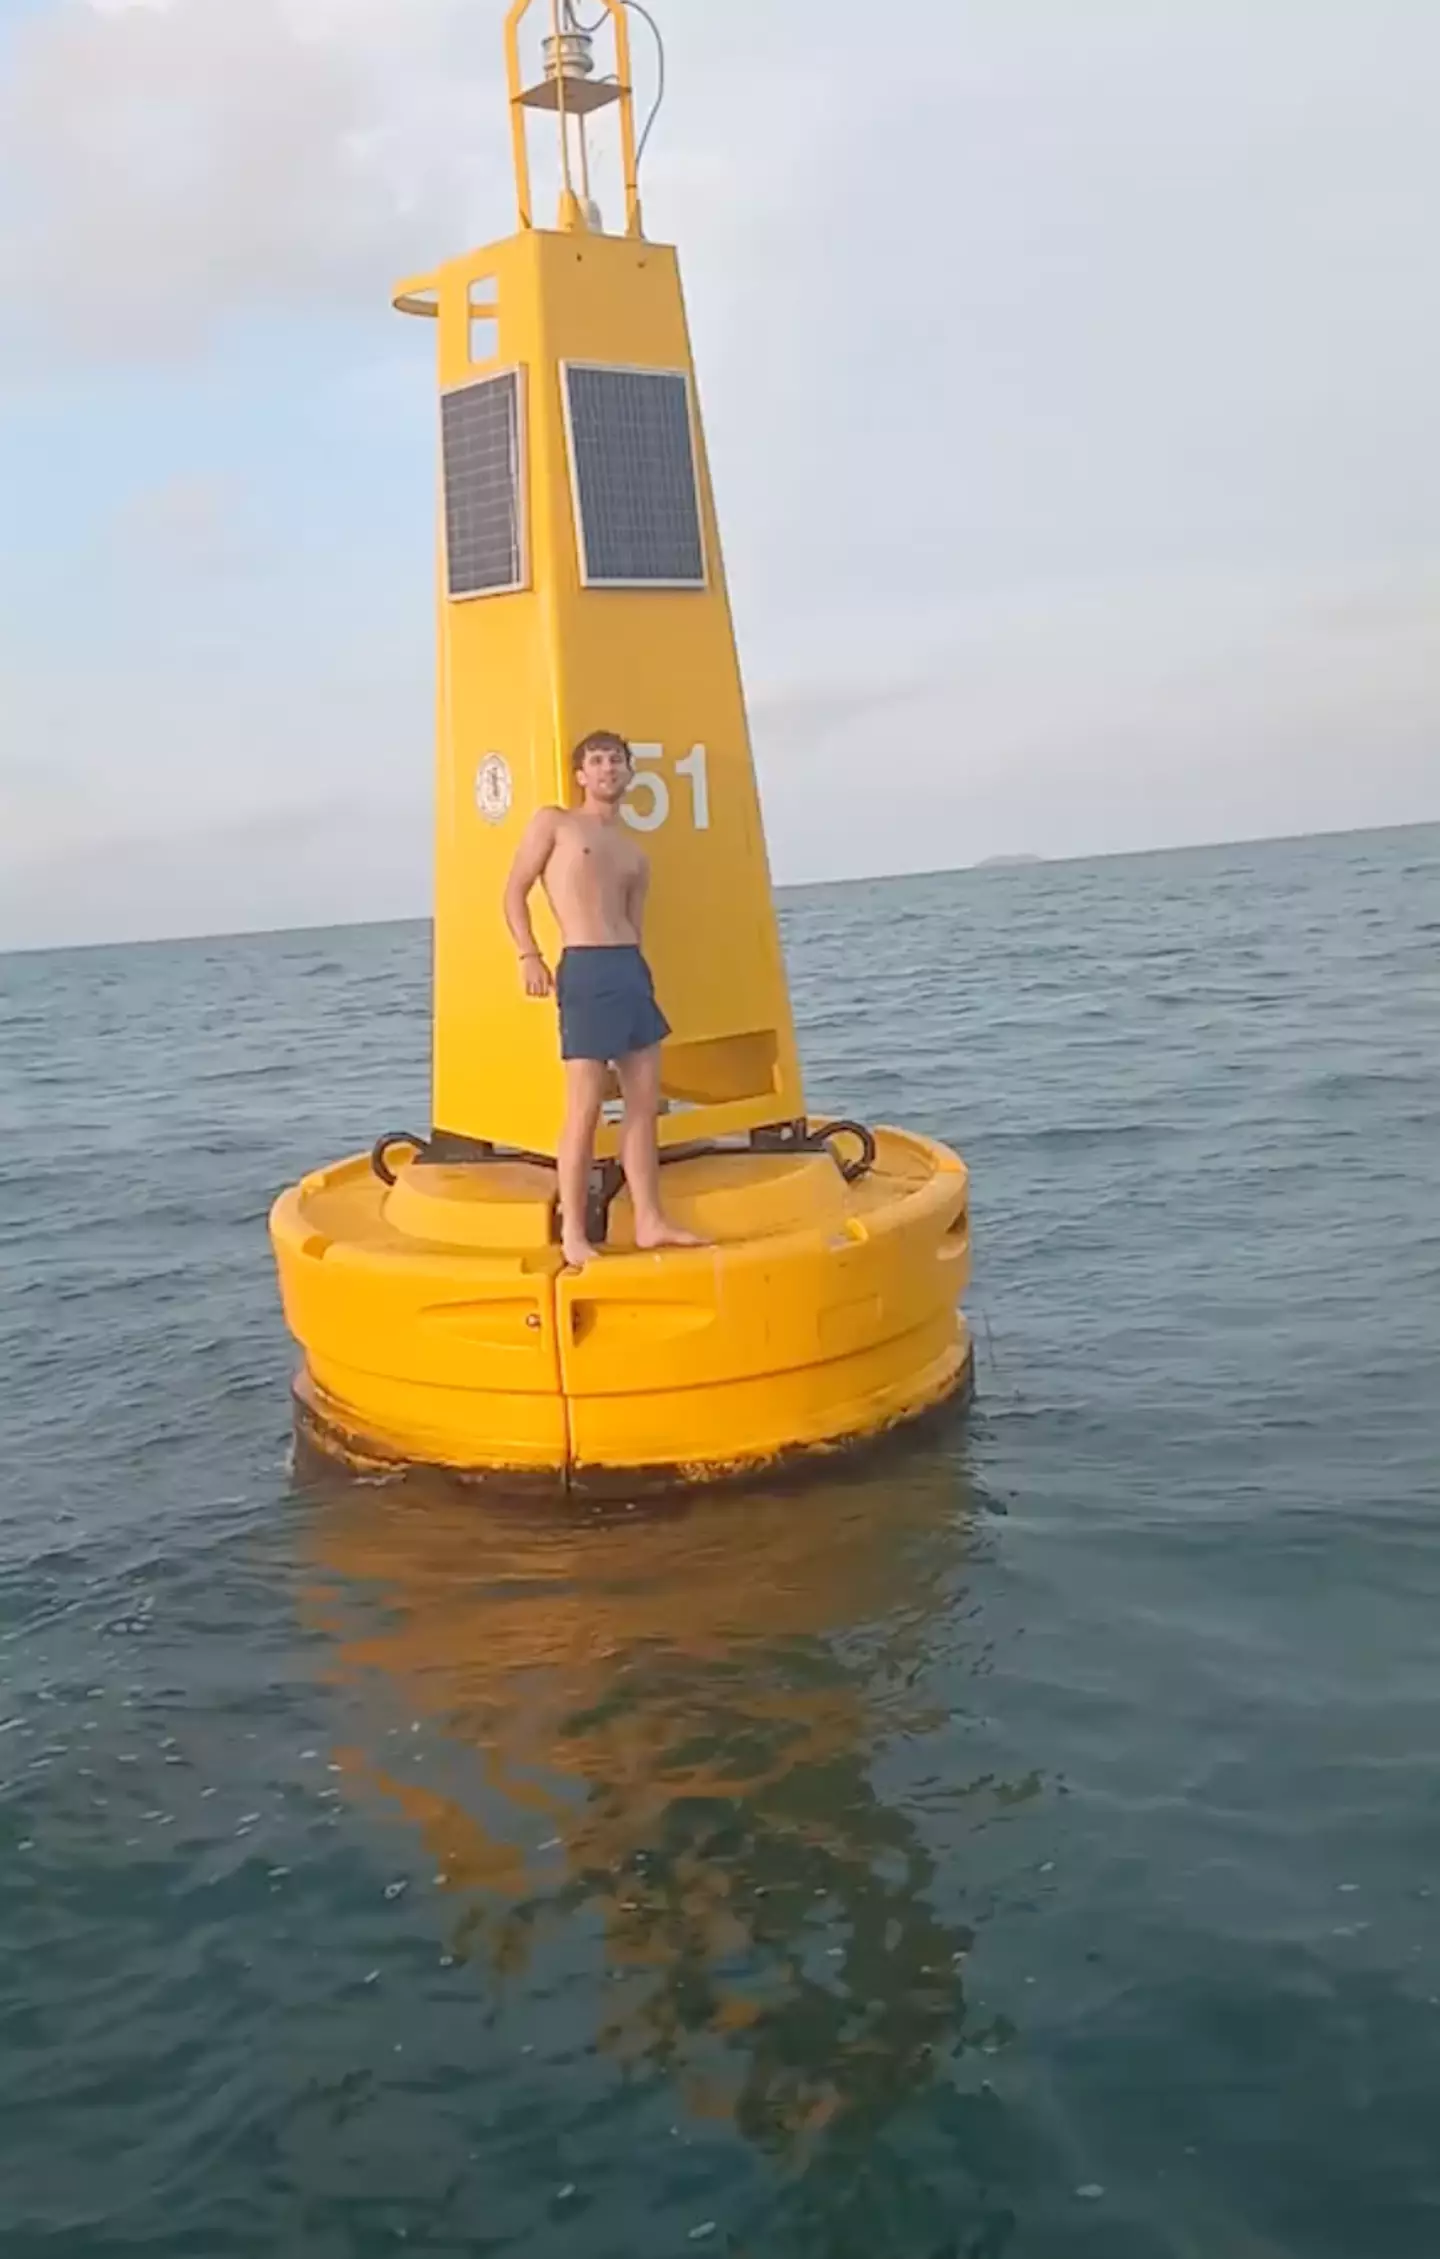 The British tourist swam out to sea and was too tired to make it back to the beach, so he climbed onto a buoy and hitched a lift.